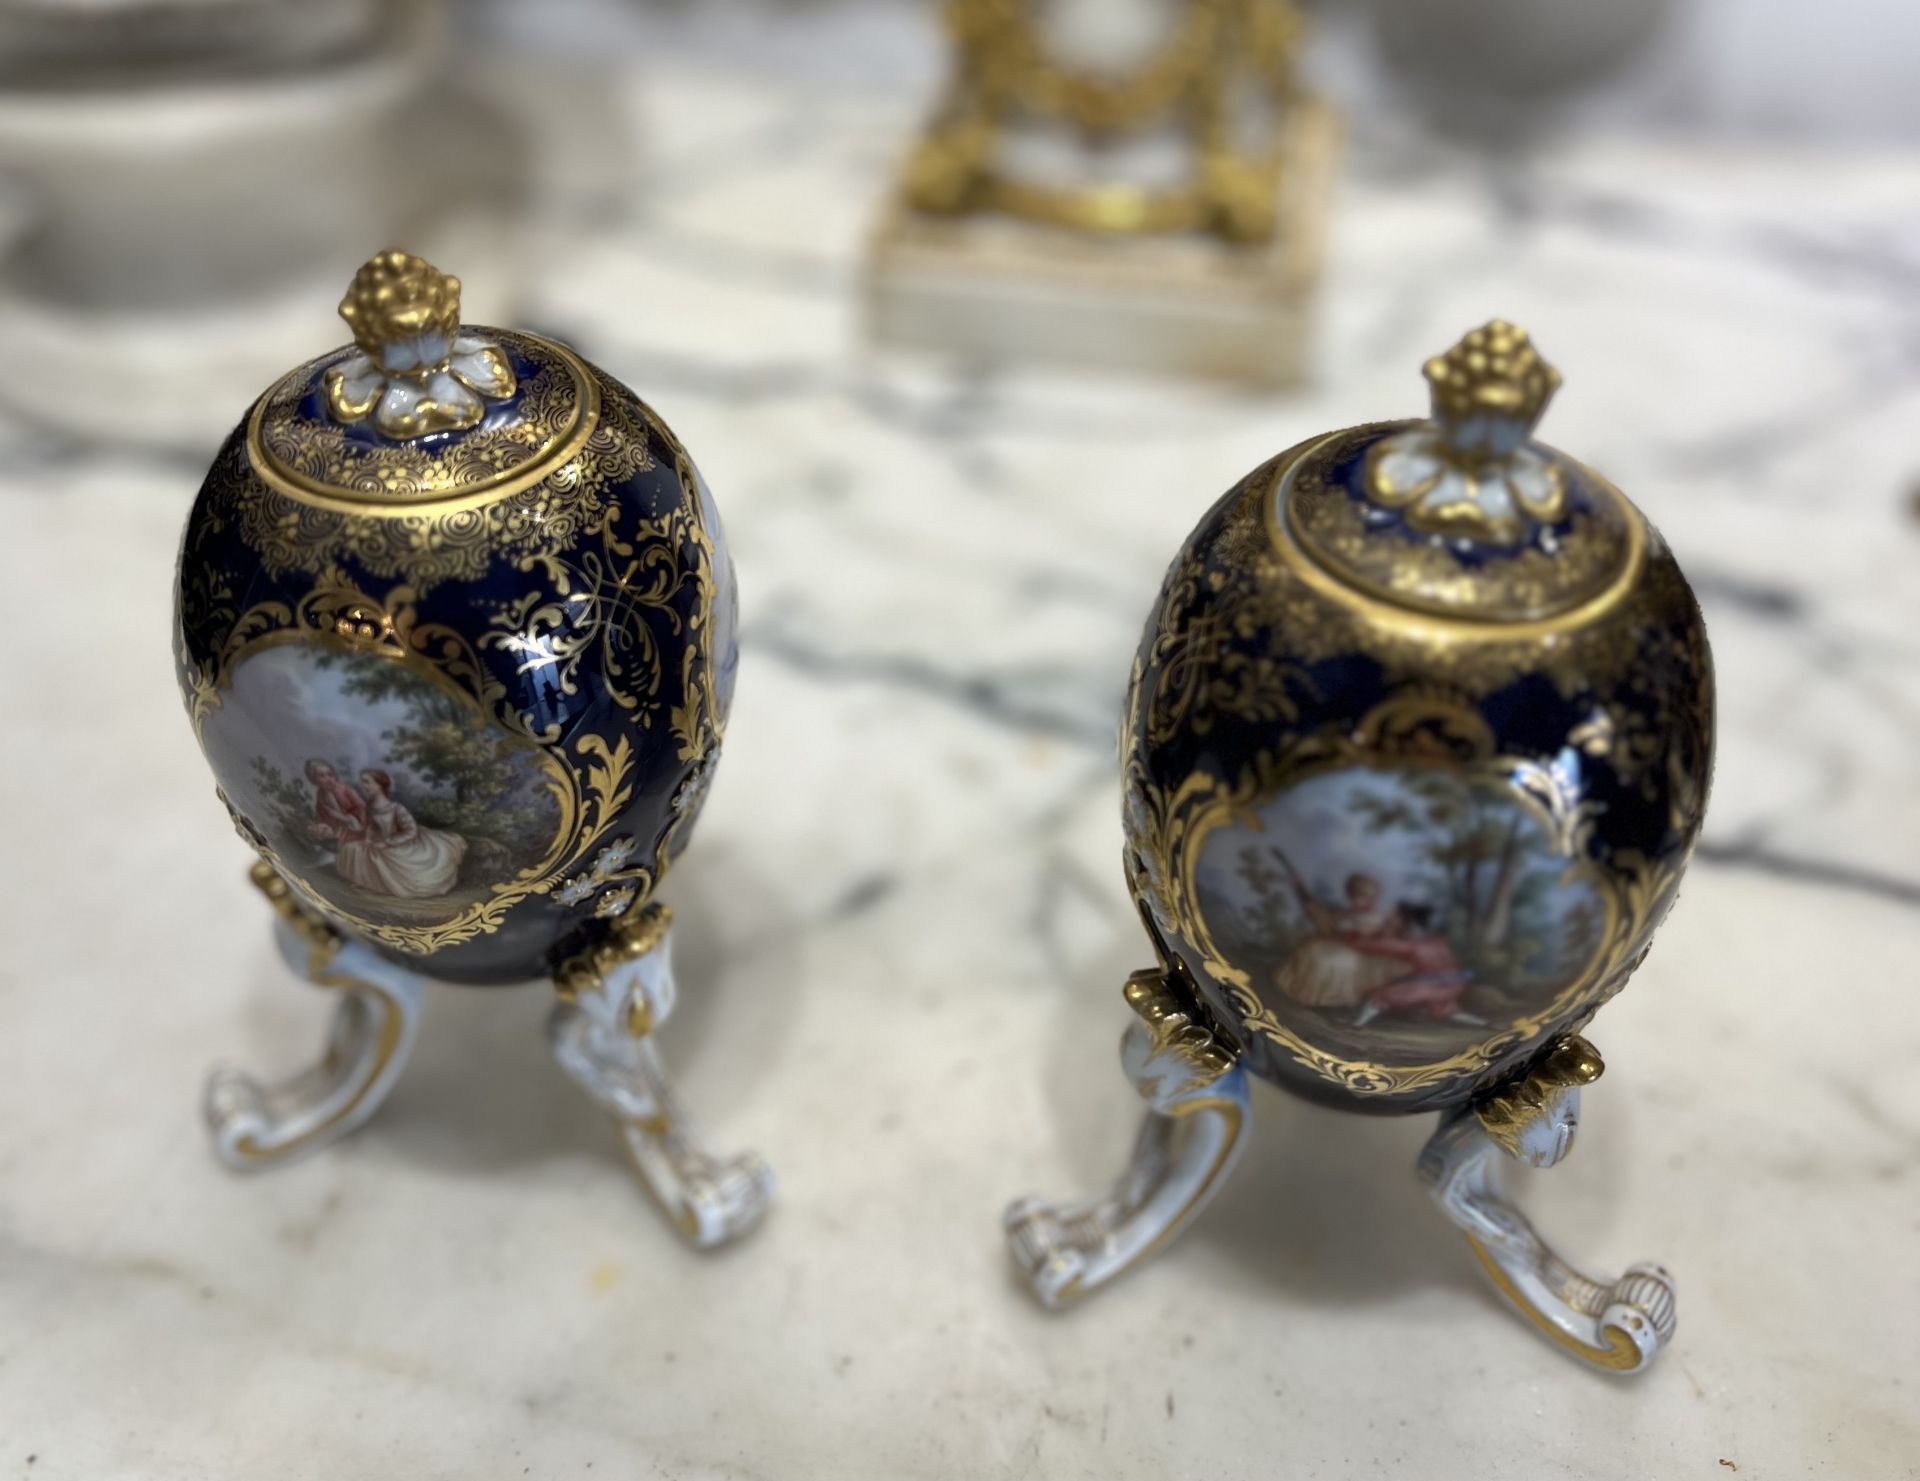 MEISSEN: A PAIR OF LATE 19TH / EARLY 20TH CENTURY PORCELAIN EGG SHAPED TEA CADDIES - Image 4 of 5